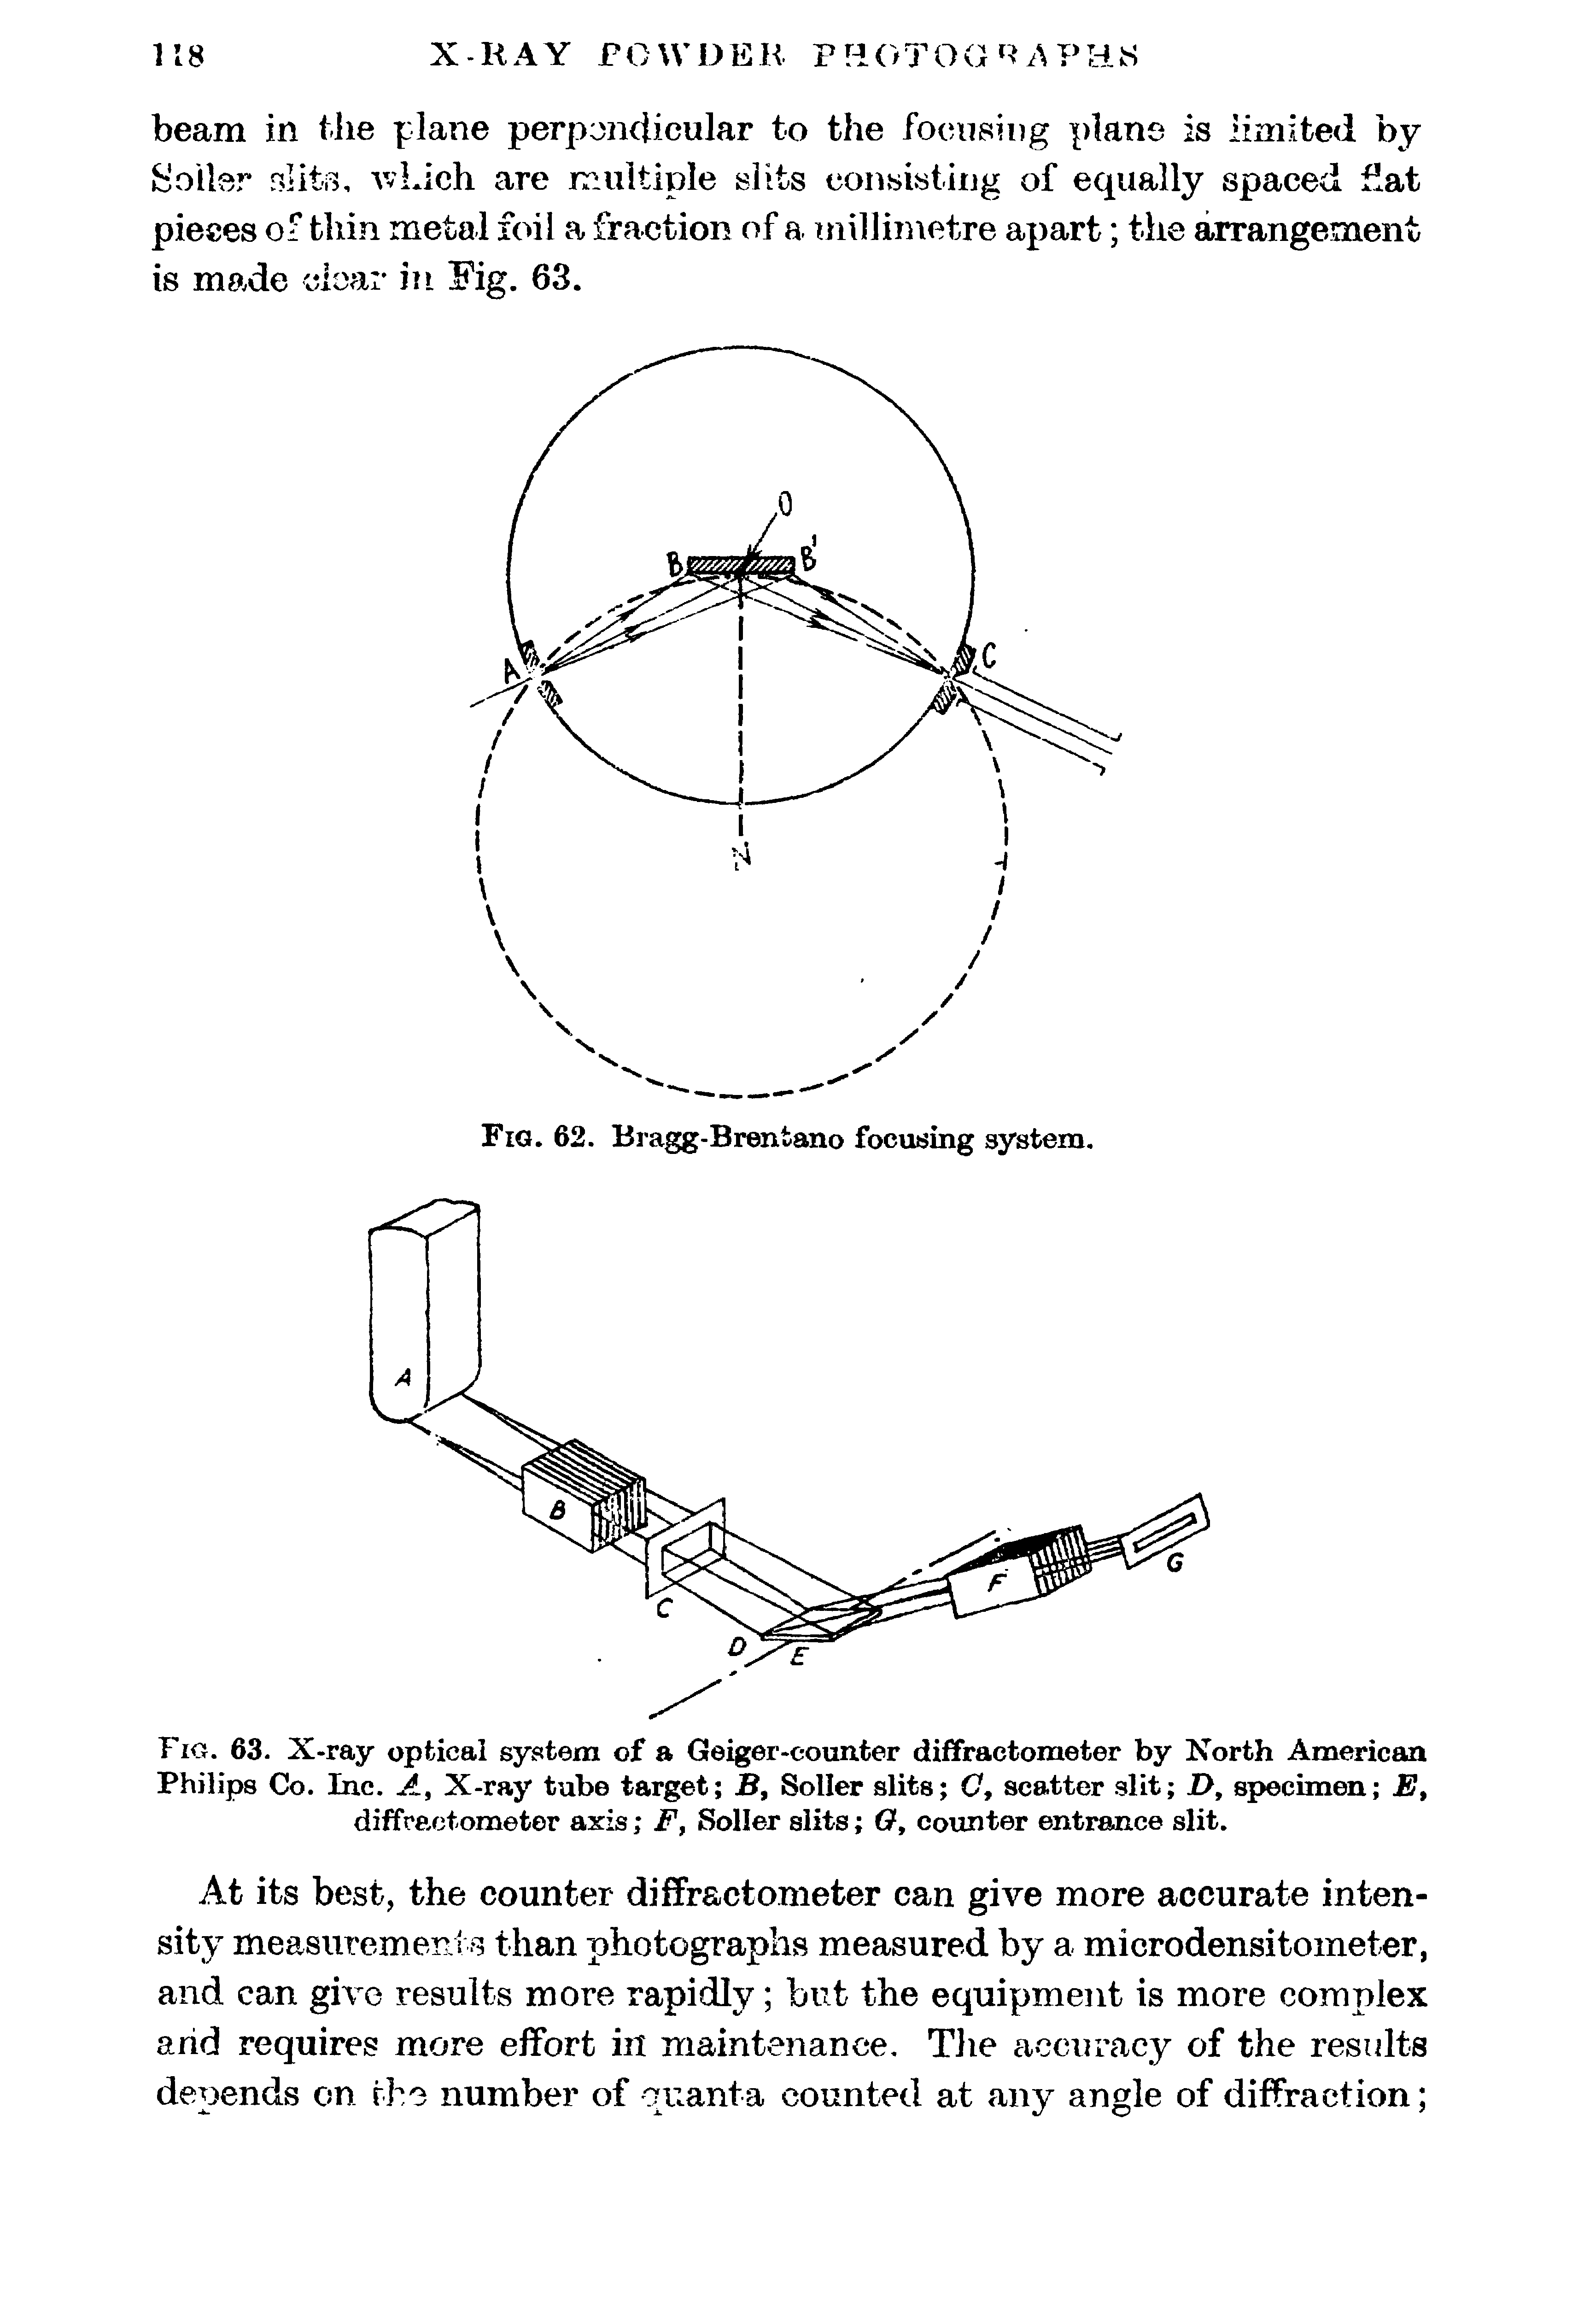 Fig. 63. X-ray optical system of a Geiger-counter diffractometer by Xorth American Philips Co. Inc. A, X-ray tube target B, Soller slits <7, scatter slit D, specimen Et diffractometer axis F, Soller slits G> counter entrance slit.